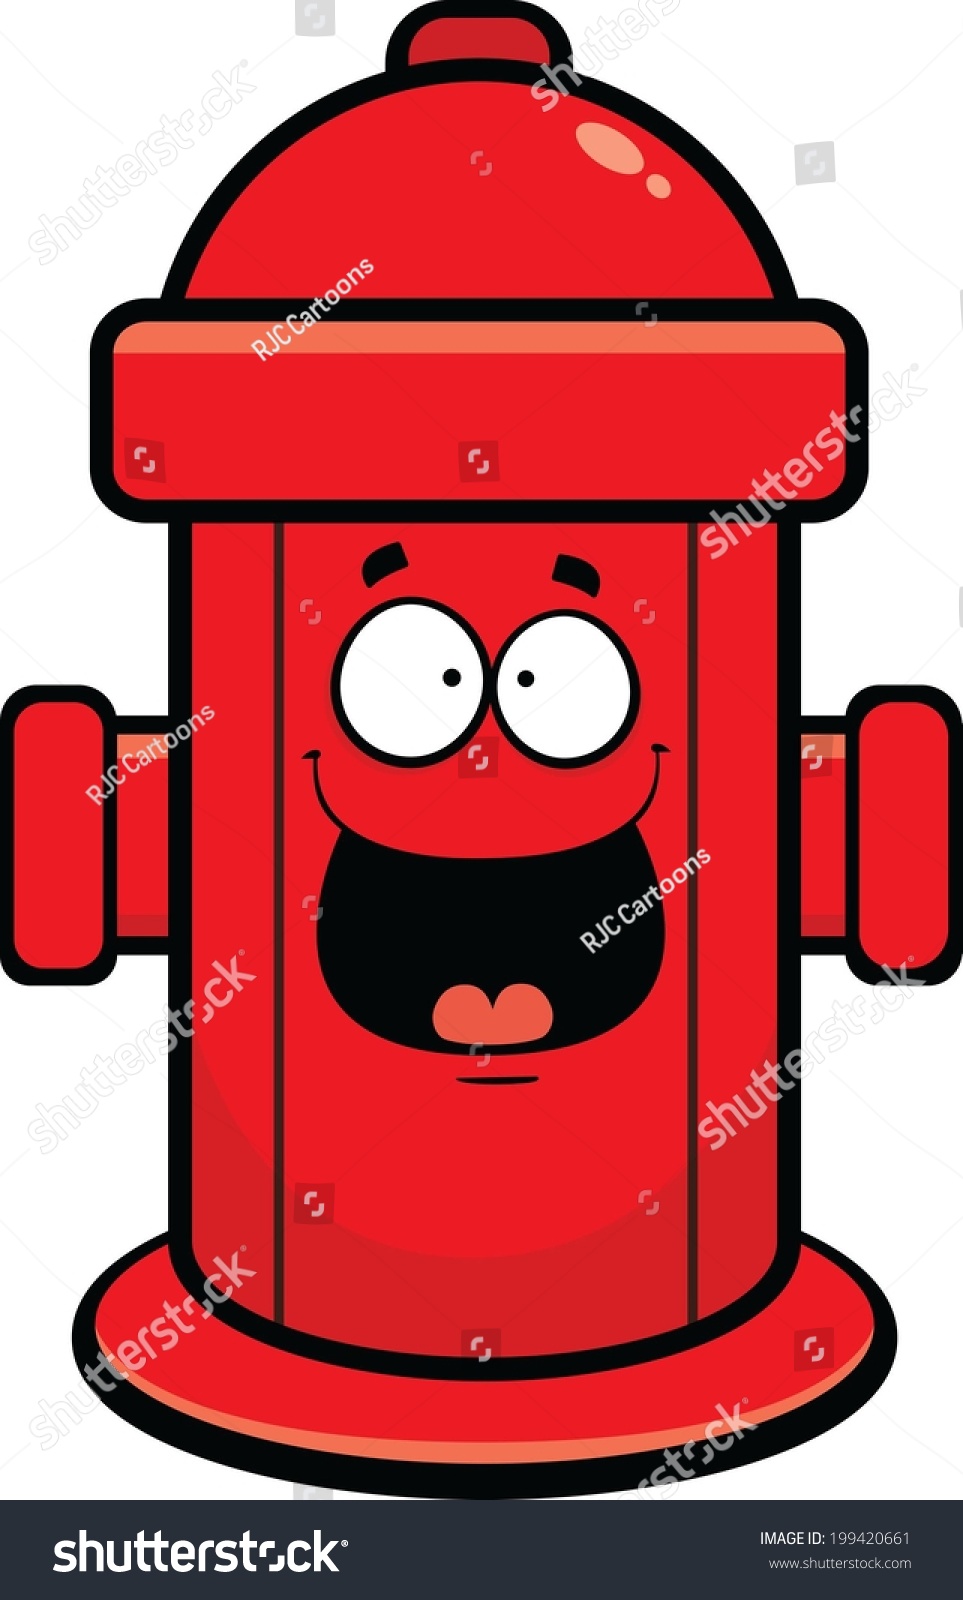 Best of Fire hydrant images clip art